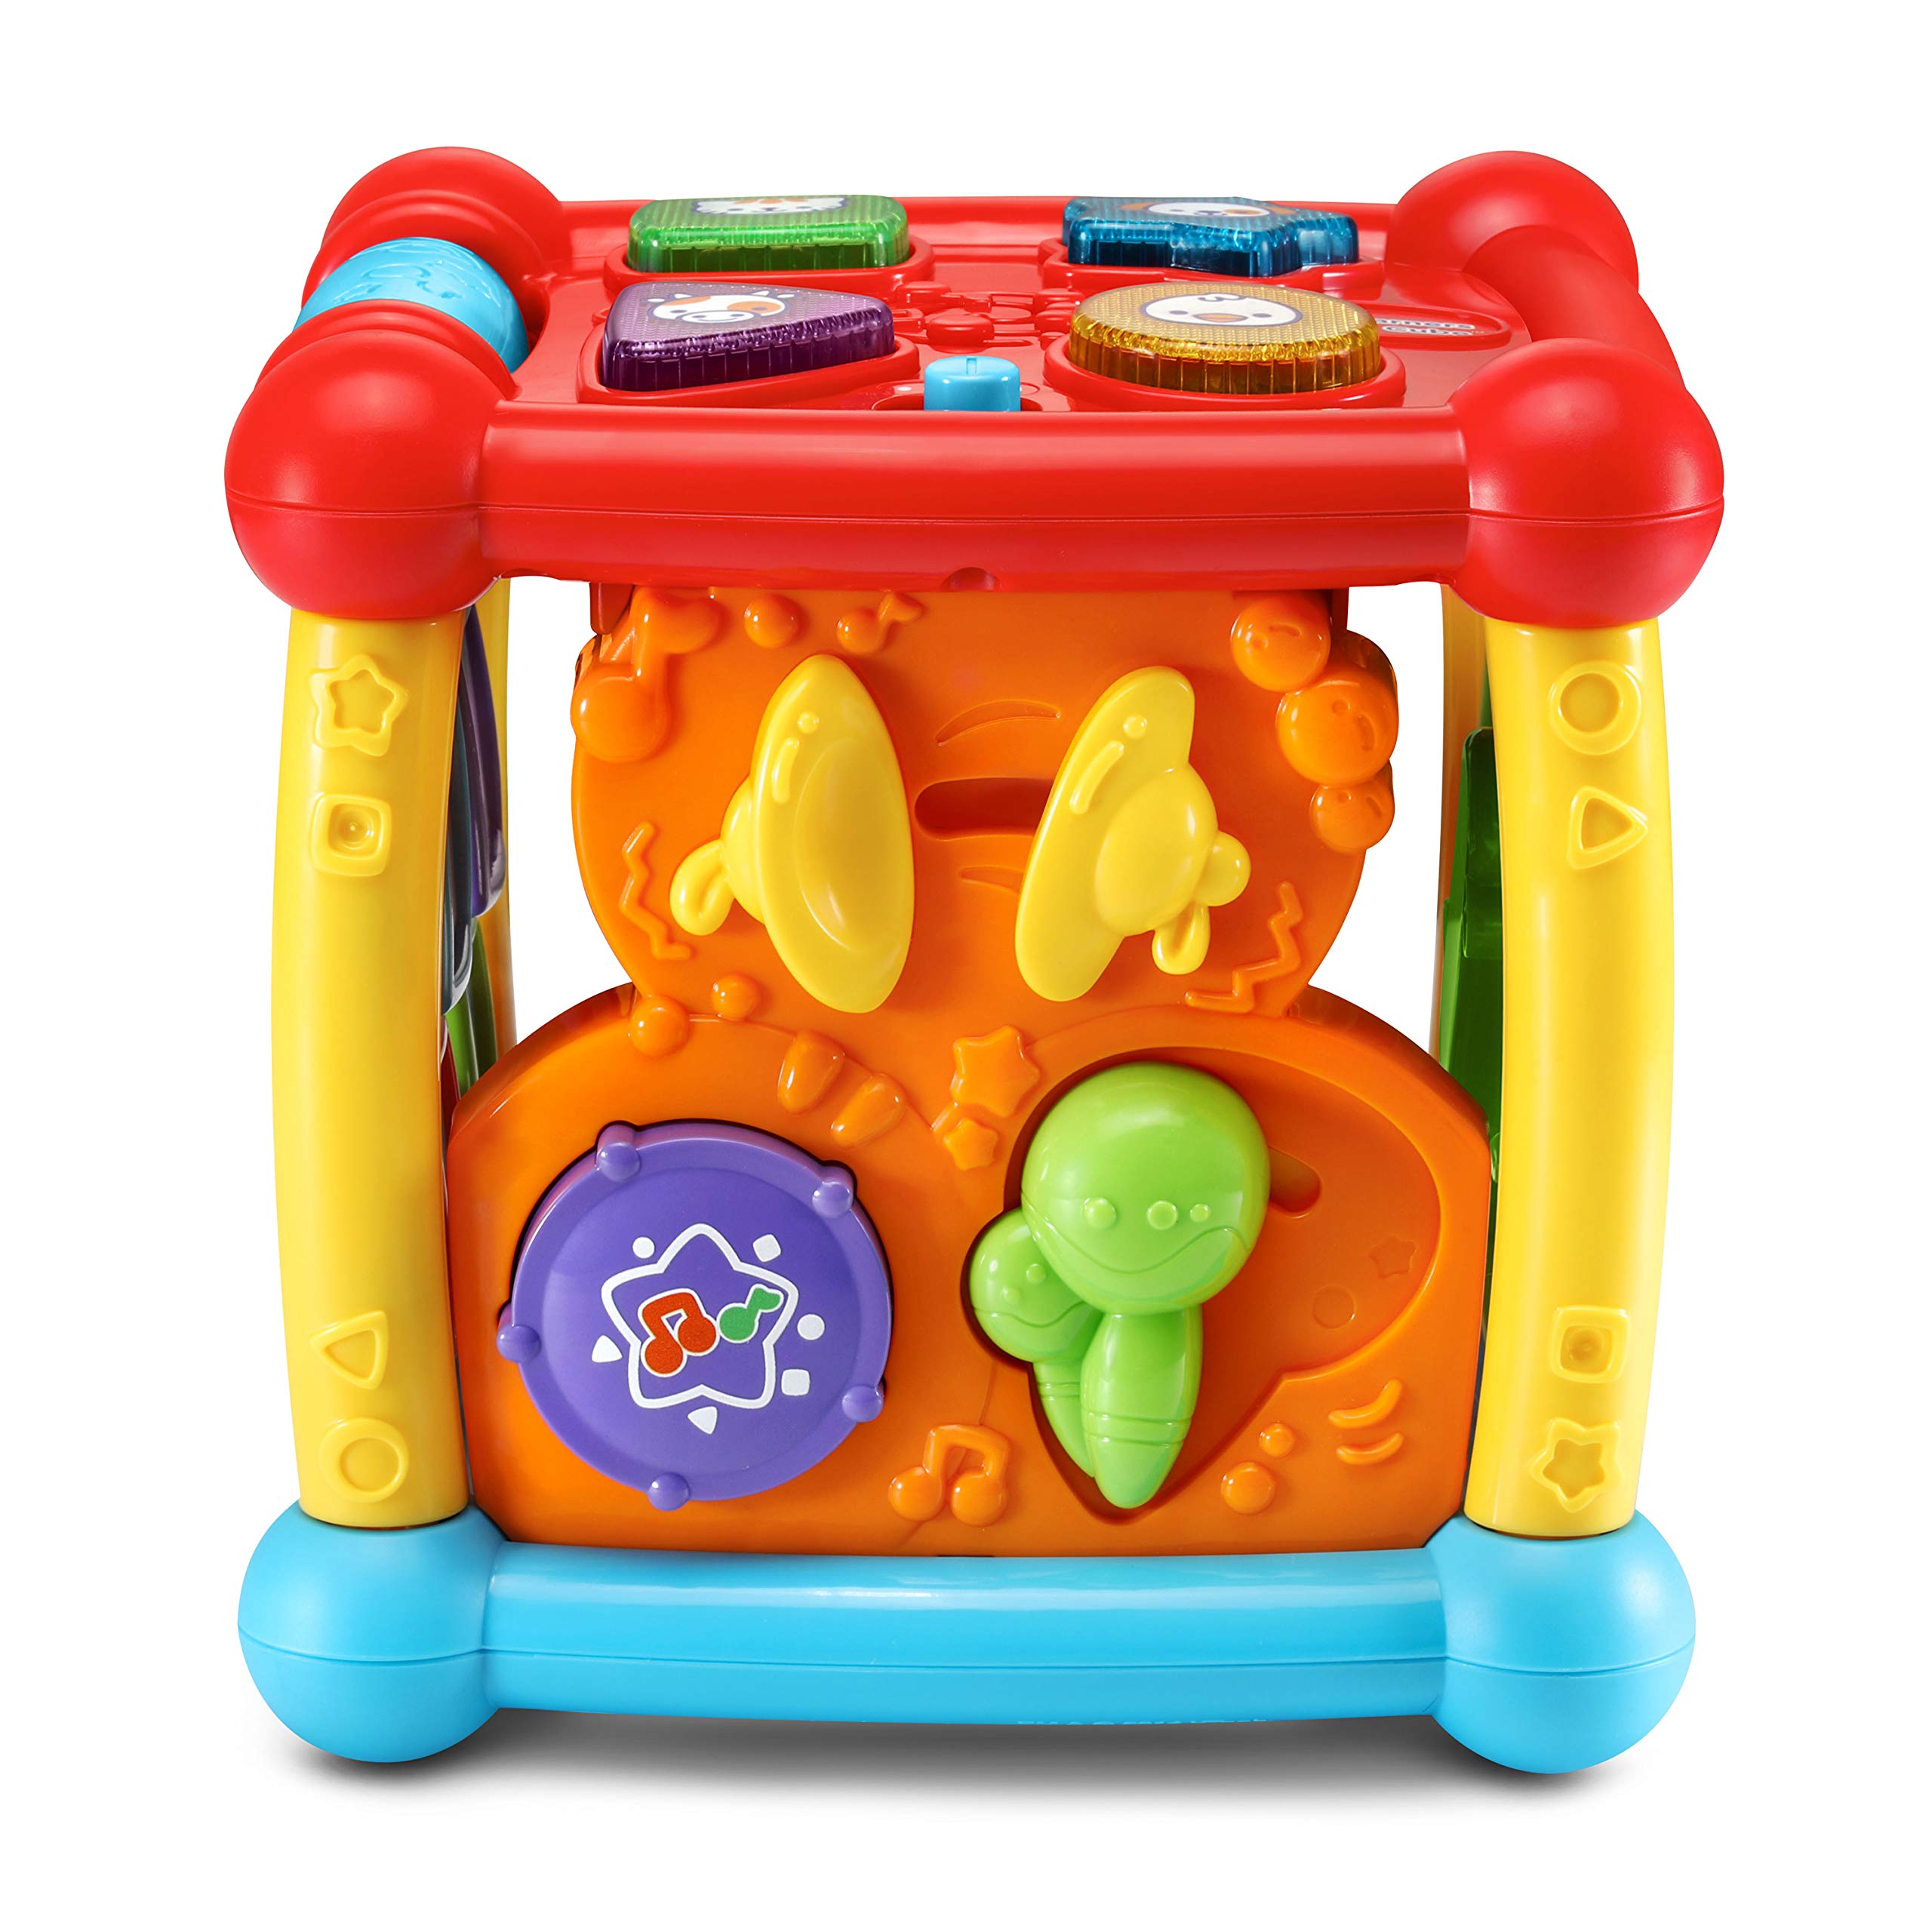 VTech Busy Learners Activity Cube, Multicolor